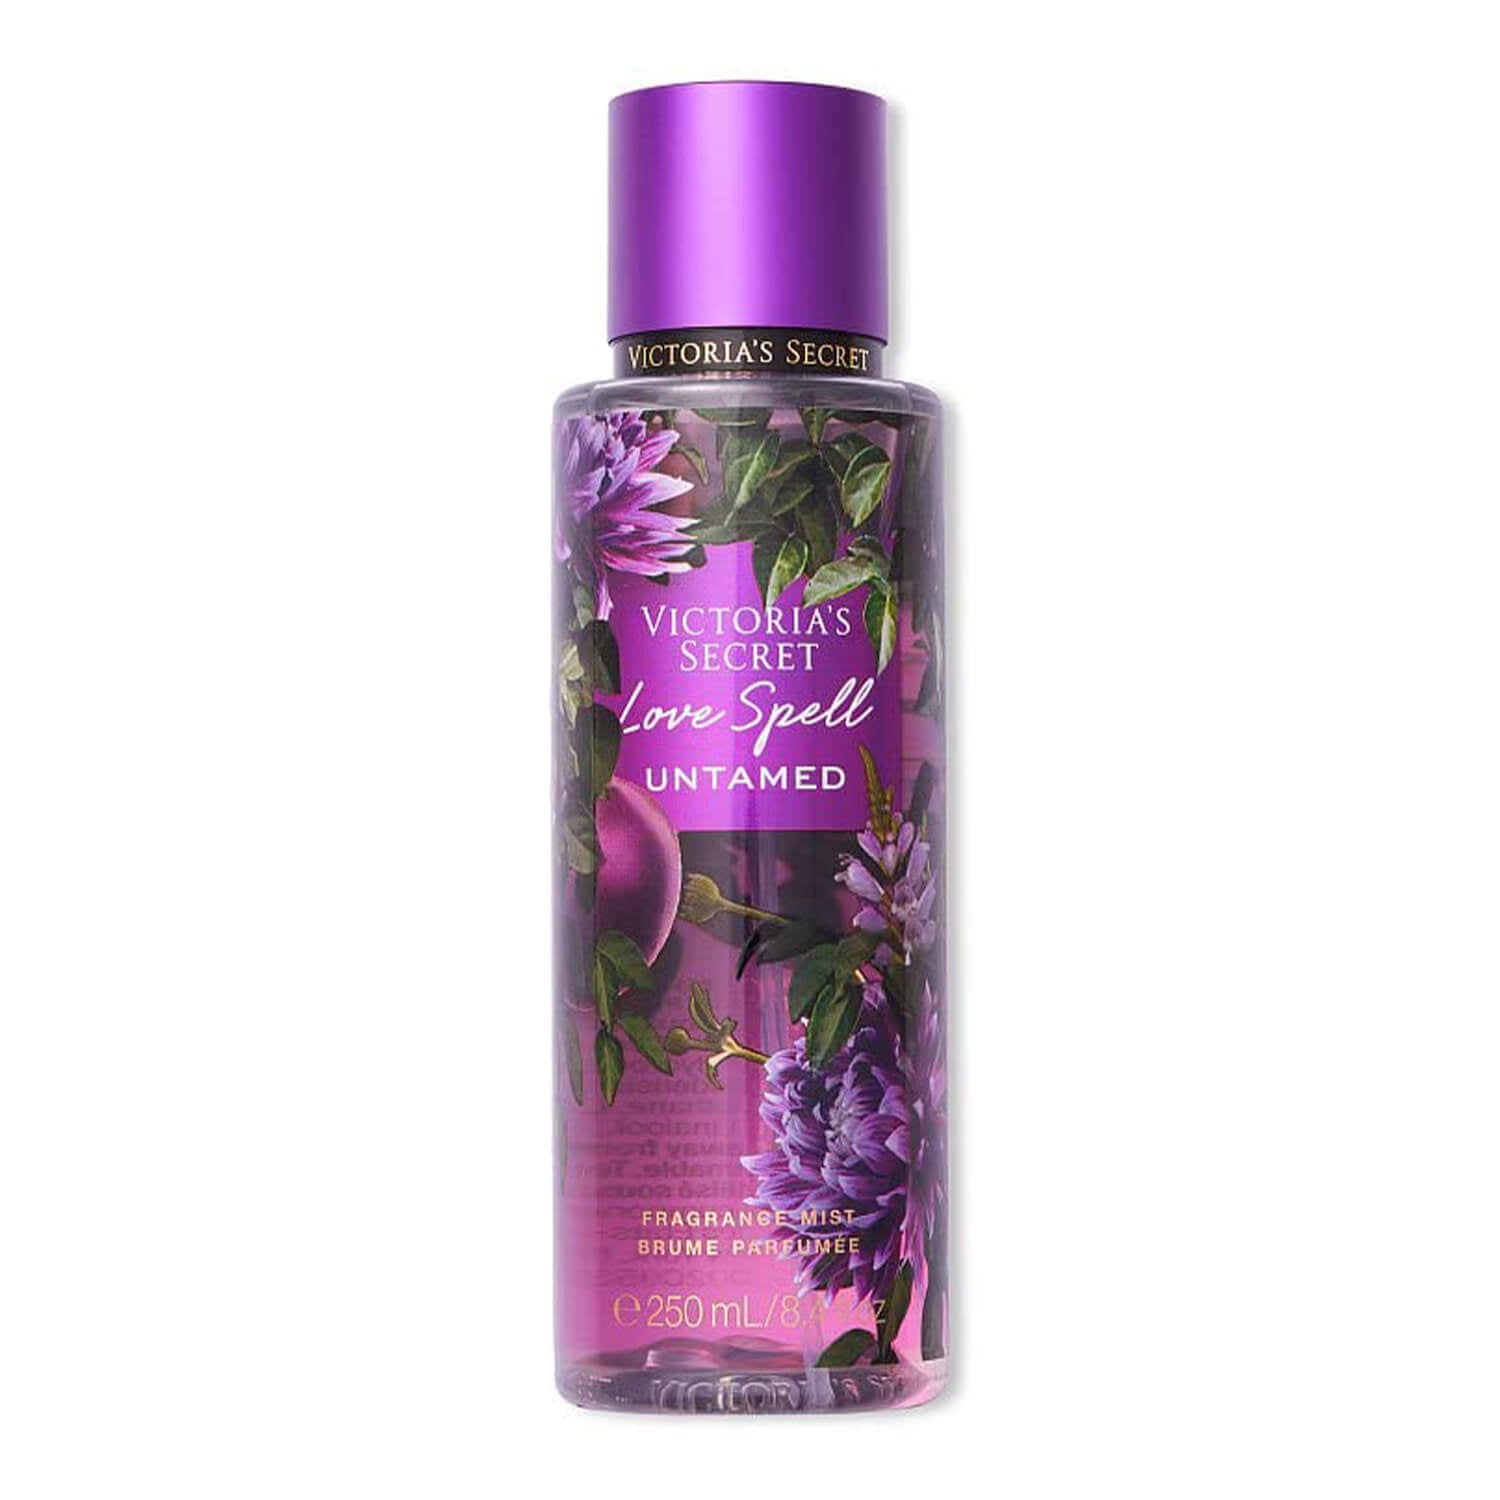 Shop Victoria's Secret mist in love spell untamed fragrance available at Heygirl.pk for delivery in Pakistan